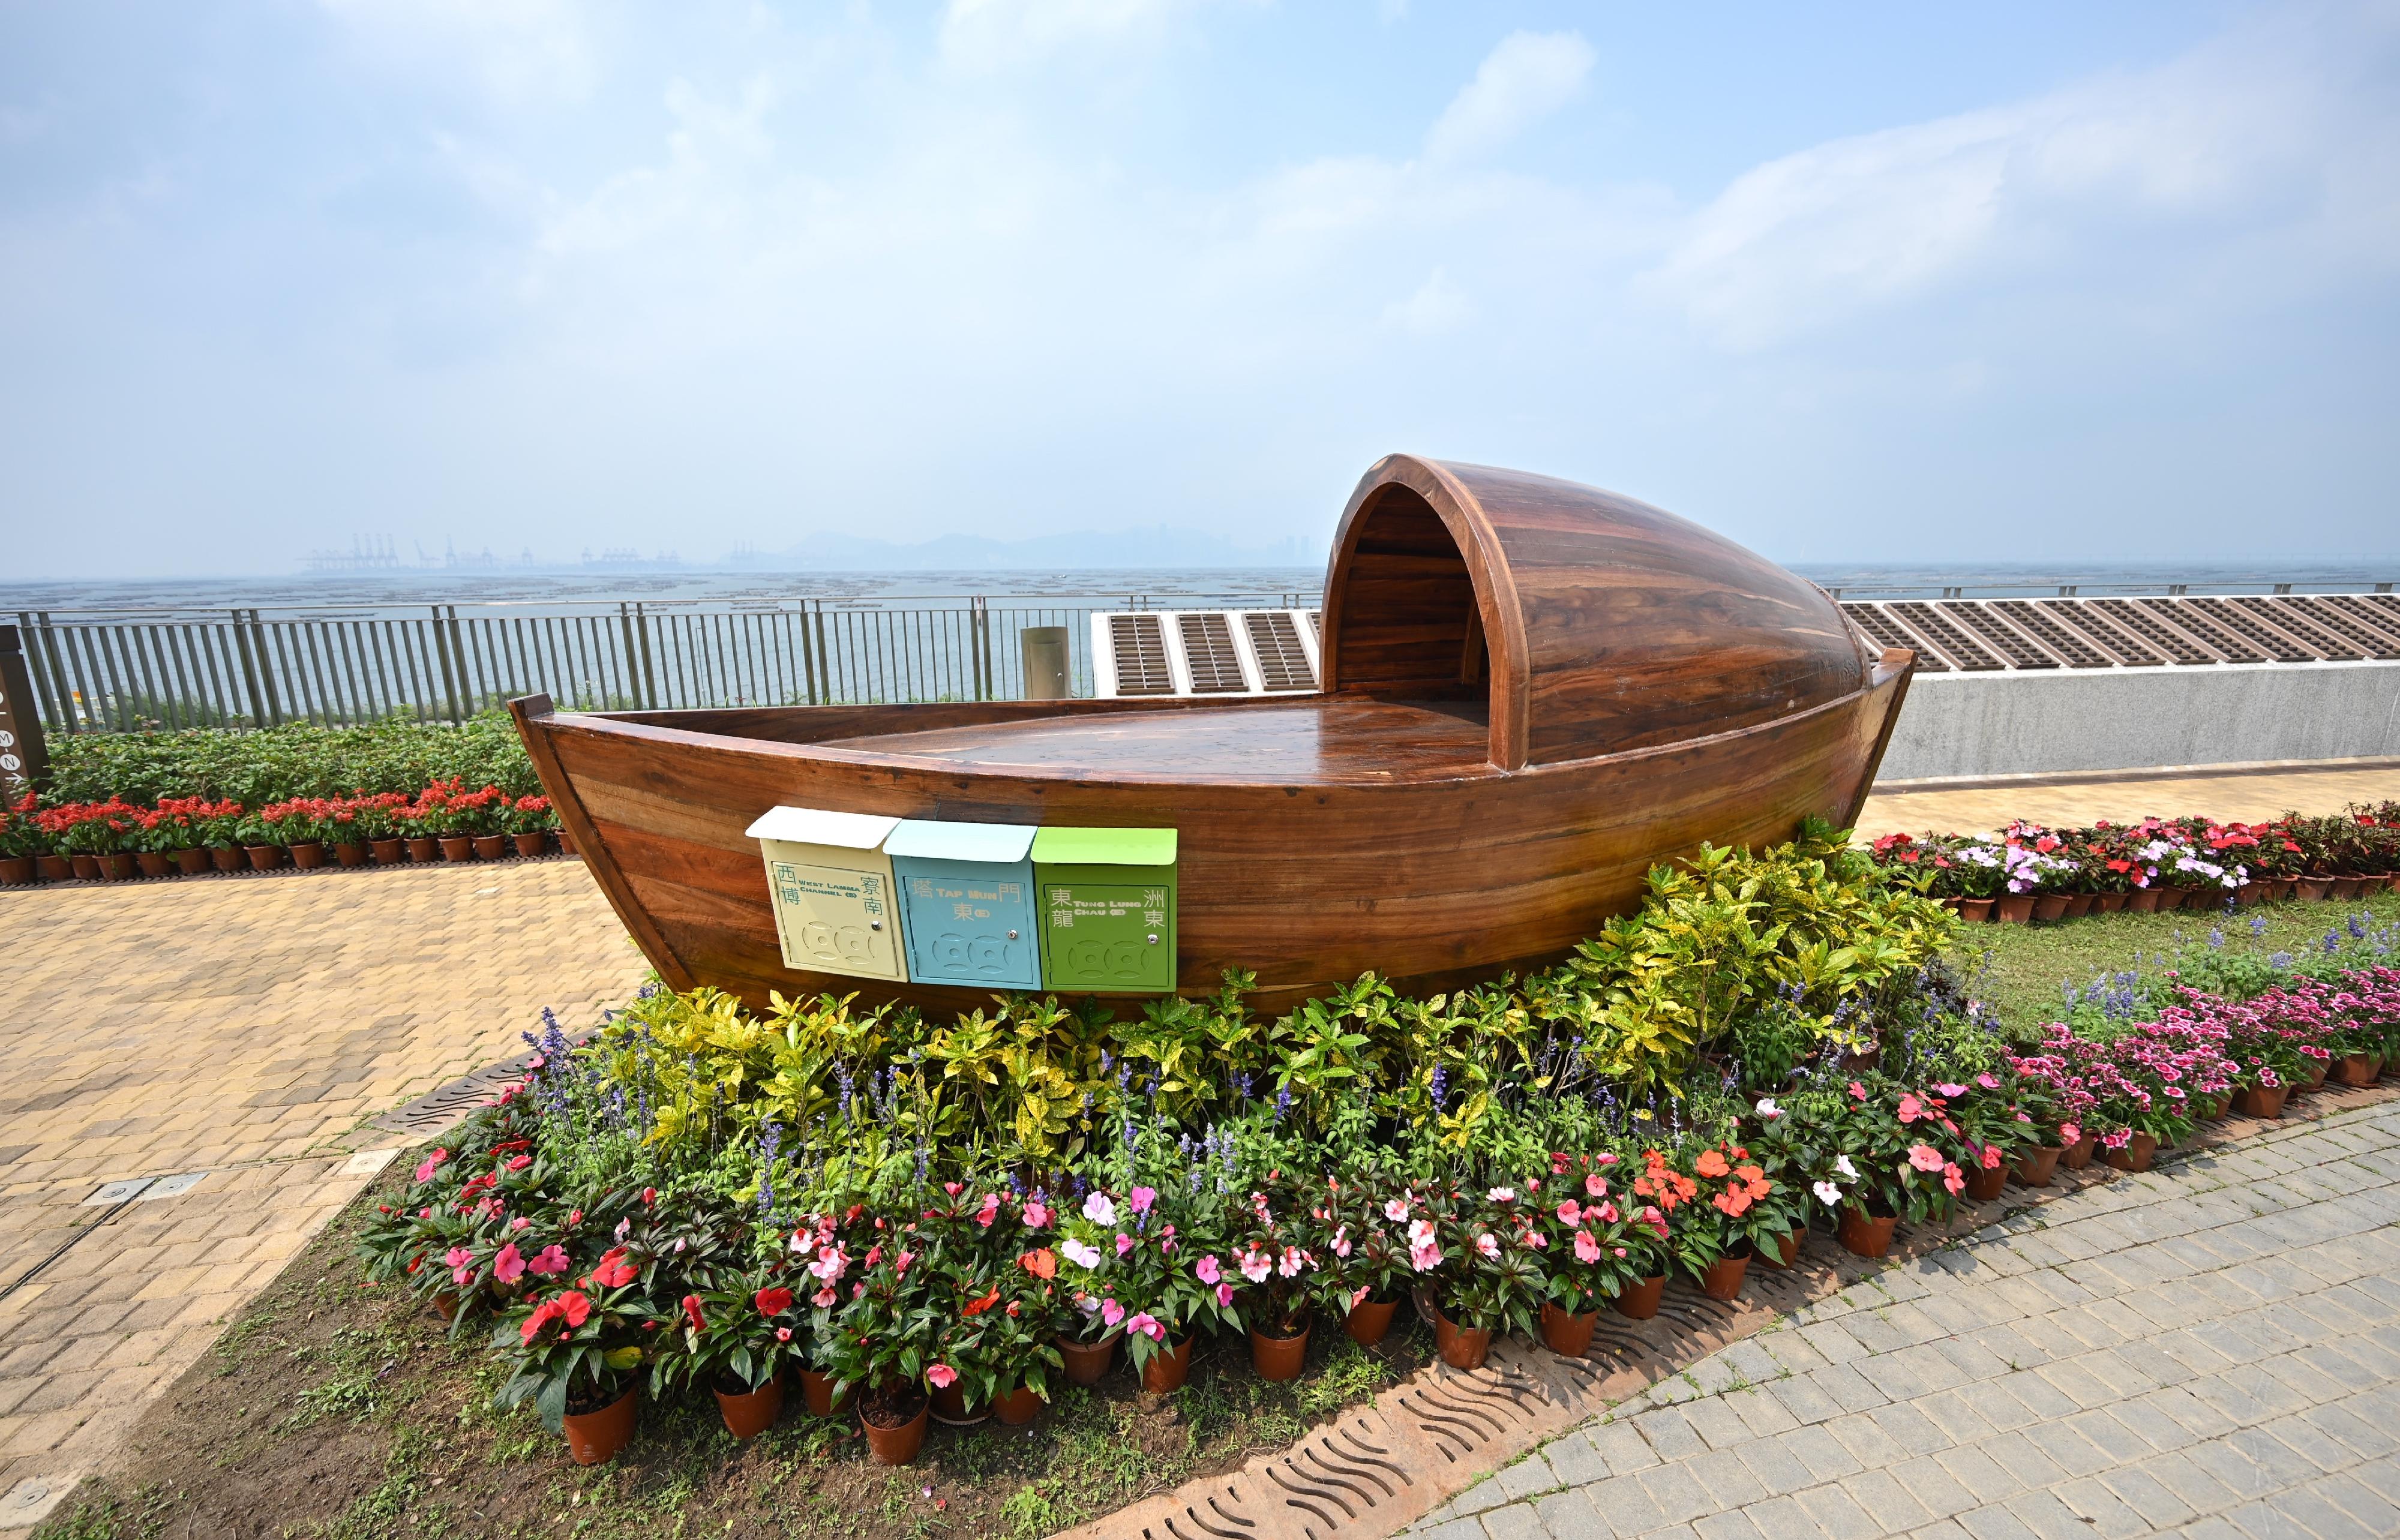 The Food and Environmental Hygiene Department said today (April 3) that to further enhance its green burial services, a wooden artwork has been installed at the Garden of Remembrance (GoR) in Tsang Tsui, Tuen Mun. Memorial post boxes with local characteristics on the artwork allow families of those who have used green burial services (including scattering of cremains at sea and in GoRs) to send their blessings and remembrance to the deceased by posting memorial notes